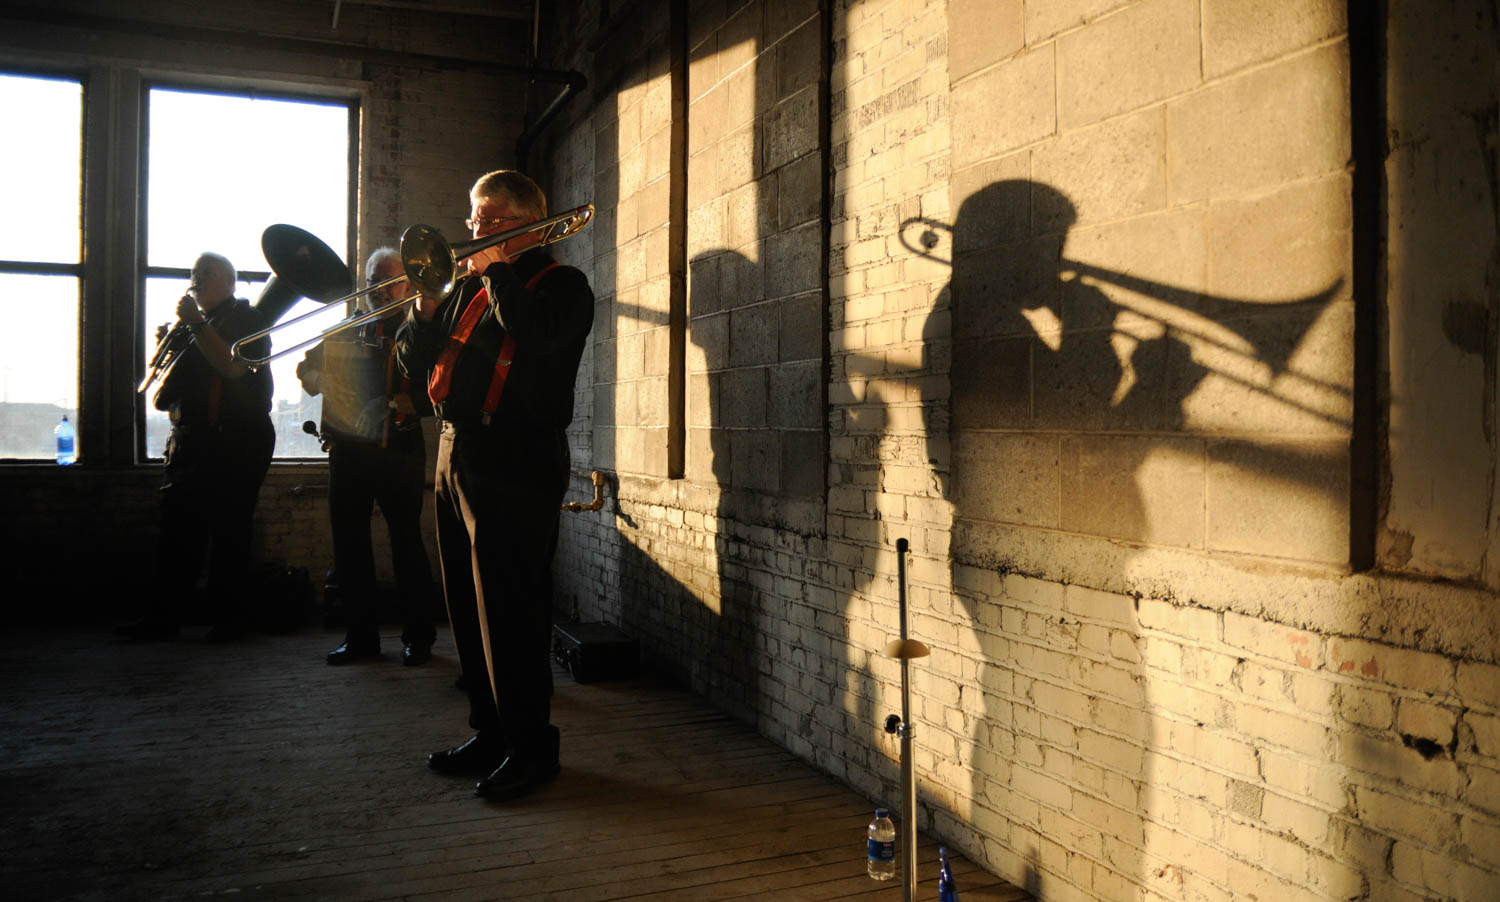 'Jinosterrifics' trombonist Jim Lee casts long shadow while he and his bandmates entertain the crowd at Thursday's ceremonial groundbreaking for the Jackson Square development late Wednesday afternoon in Rock Island. The Jackson Square project will redevelop the old Illinois Oil Products building, 321 24th Street, into 30 residential rental units and 3,700 square feet for future commercial space. (Todd Mizener - Dispatch/Argus)